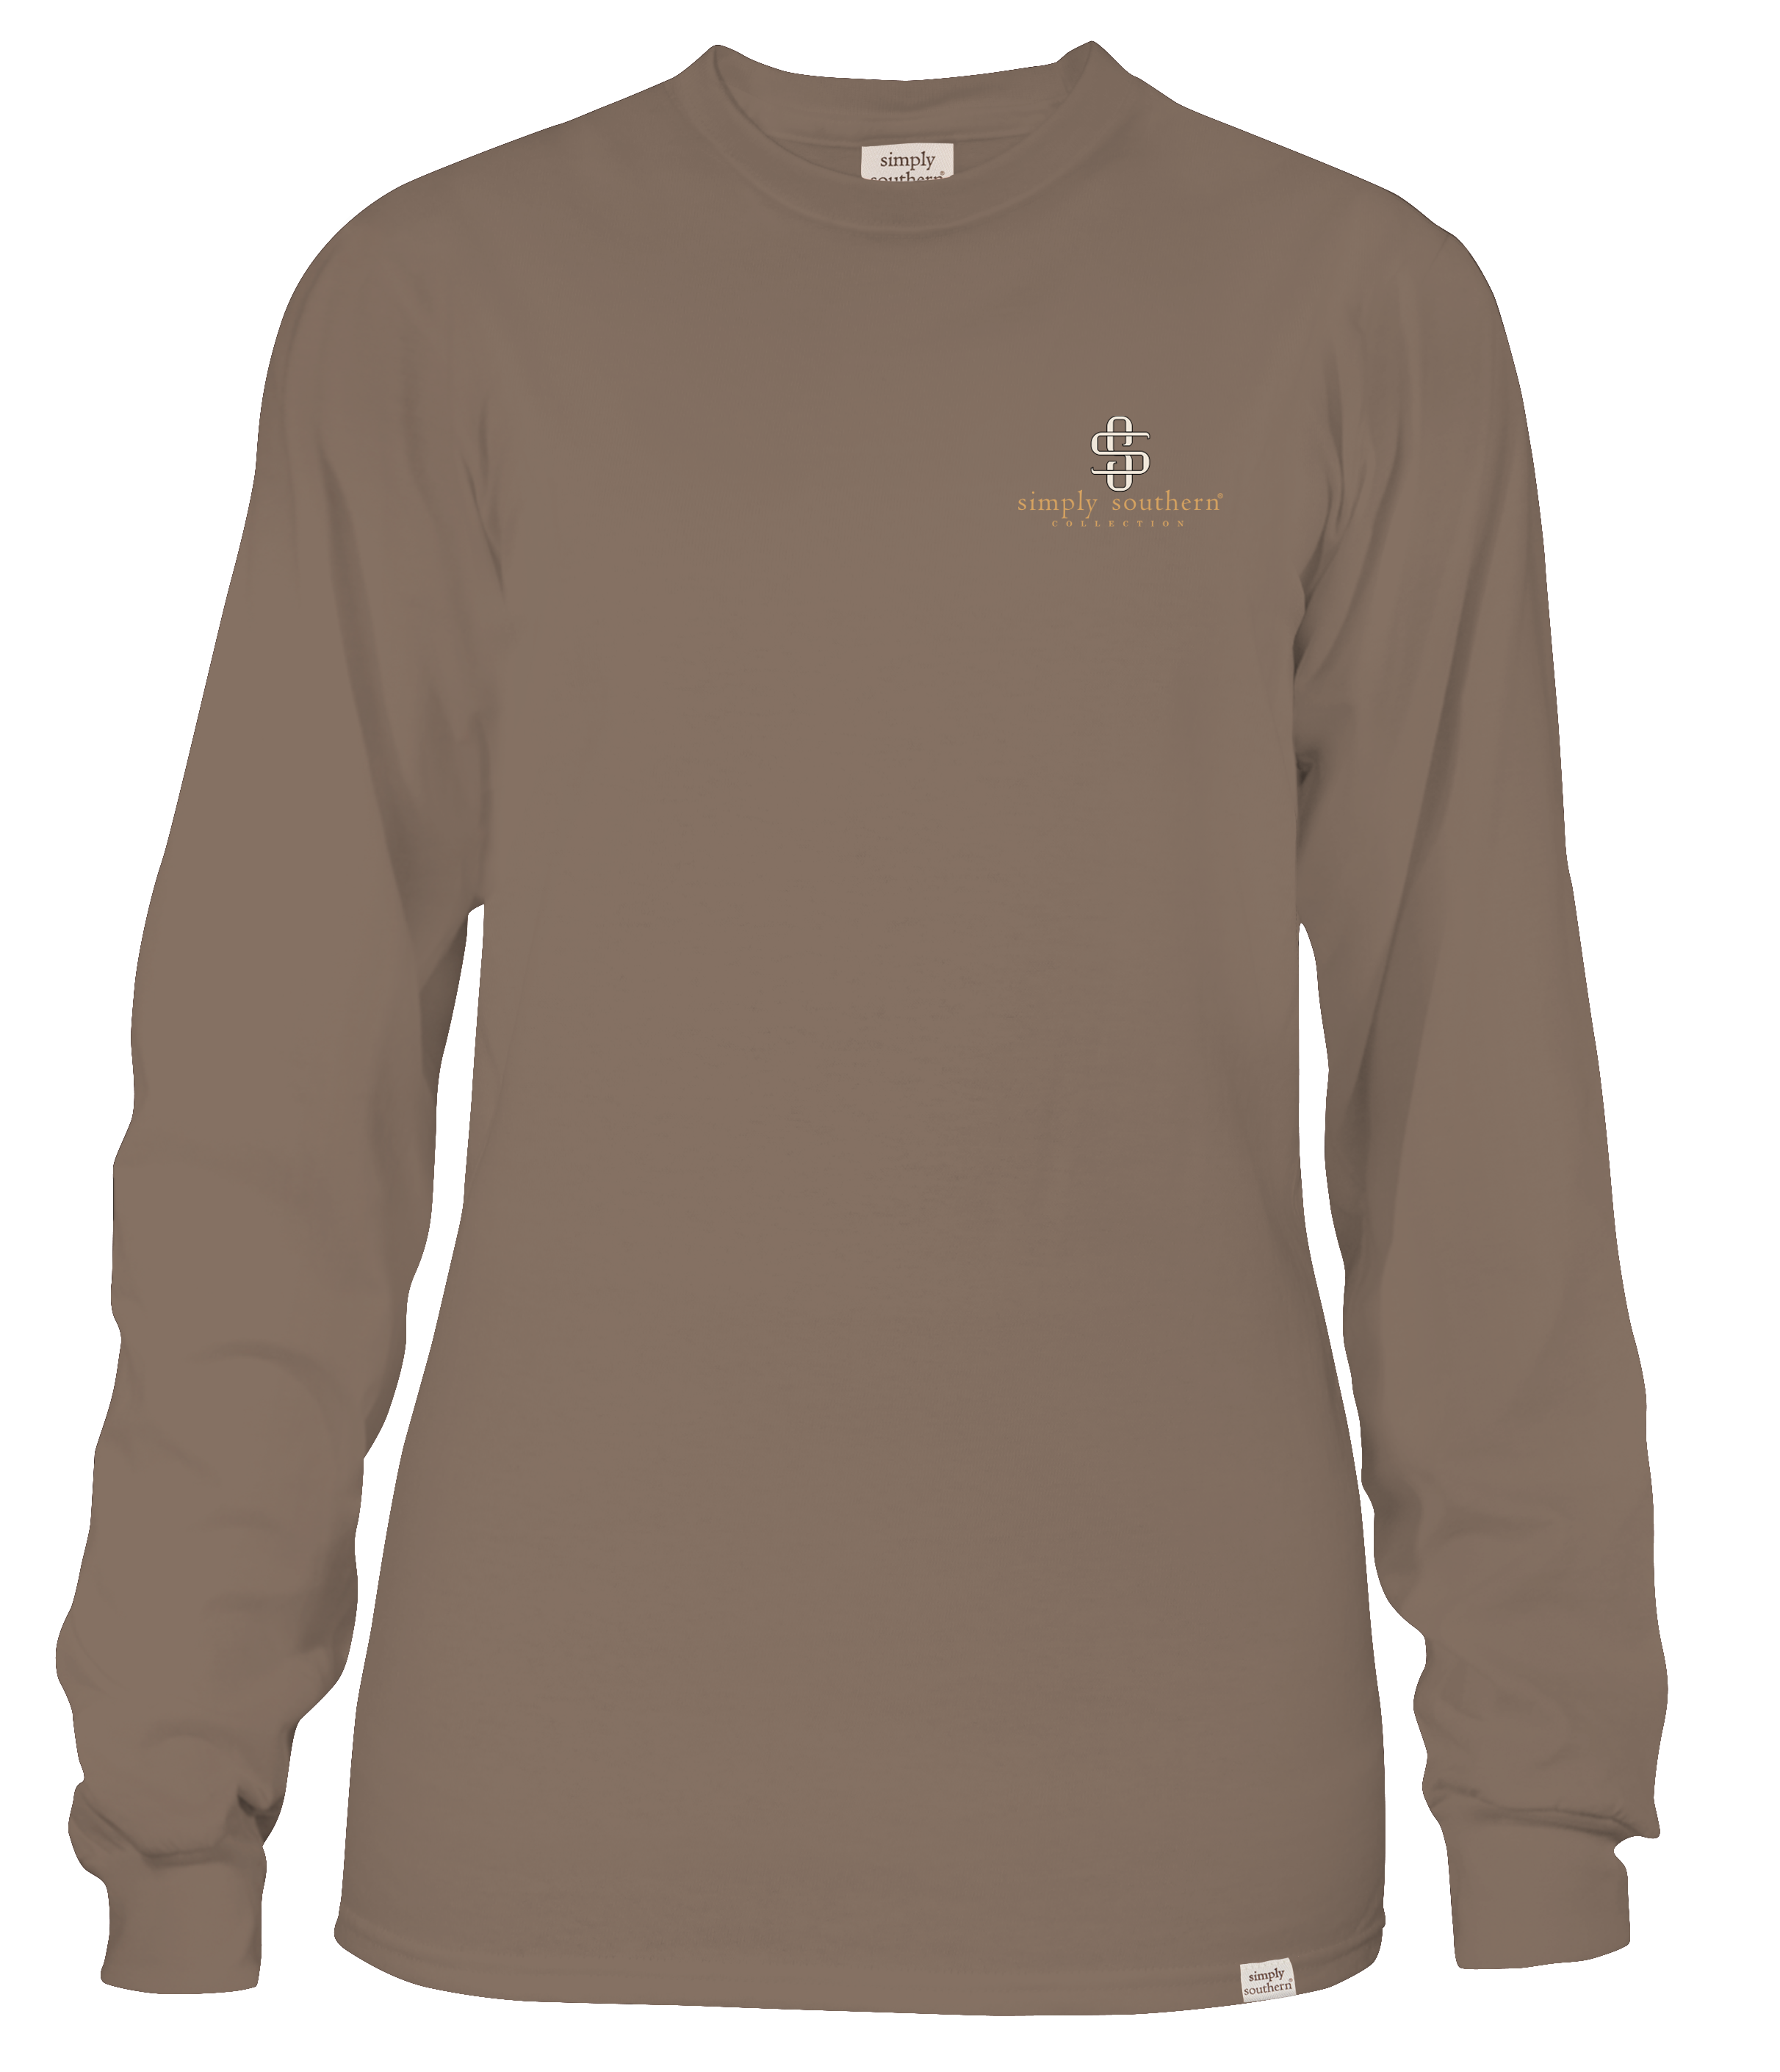 'Pumpkins, Fall Leaves, Football' Puppy Long Sleeve Tee by Simply Southern